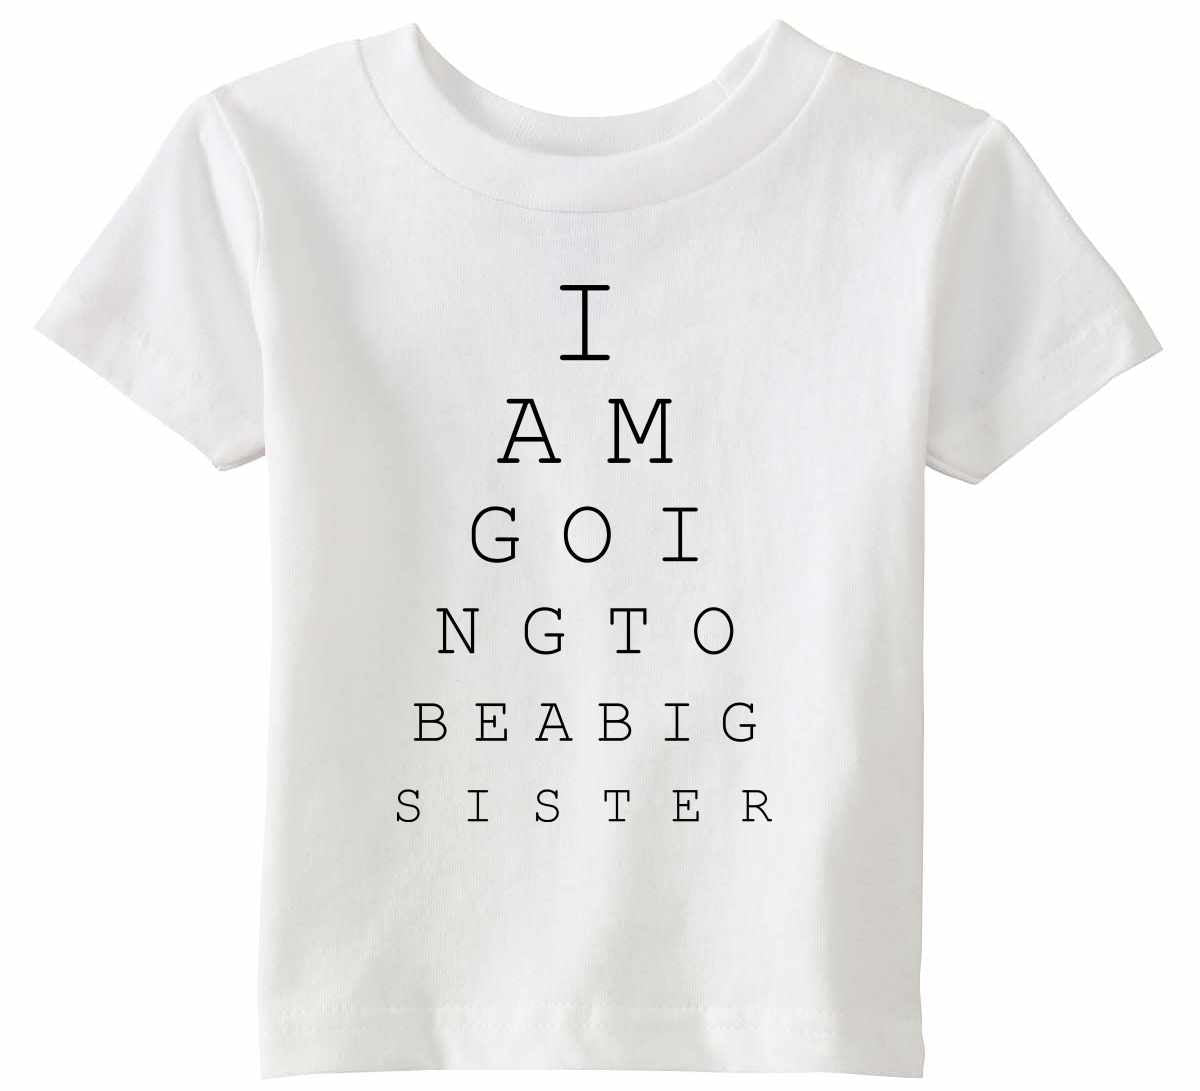 I AM GOING TO BE A BIG SISTER EYECHART Infant/Toddler 